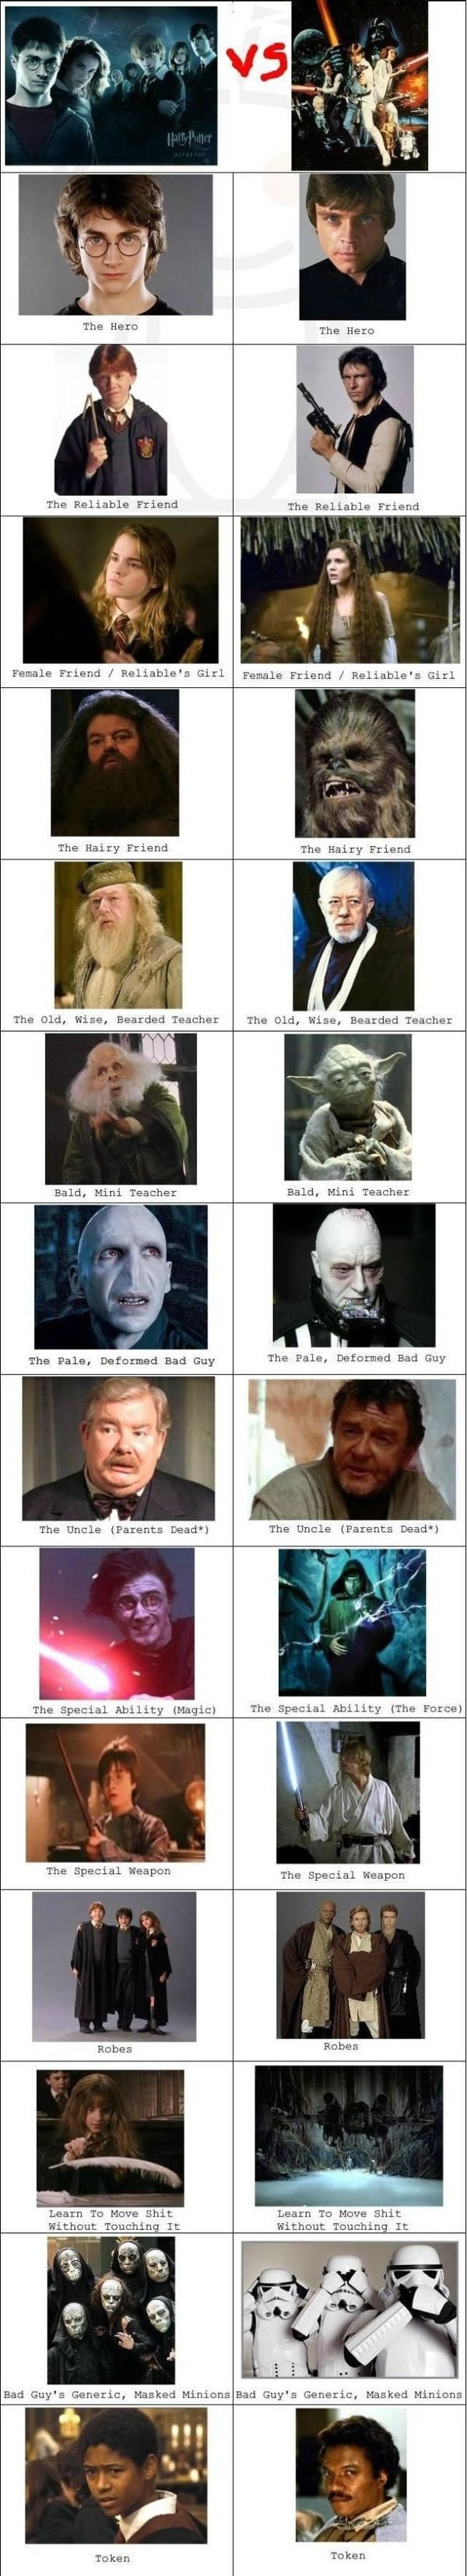 Harry Potter vs Star Wars The Hero The Reliable Friend Female Friend / Reliable's Girl The Hairy Friend The Old, Wise, Bearded Teacher Bald, Mini Teacher The Pale, Deformed Bad Guy The Uncle (Parents Dead*) The Special Ability (Magic / The Force)